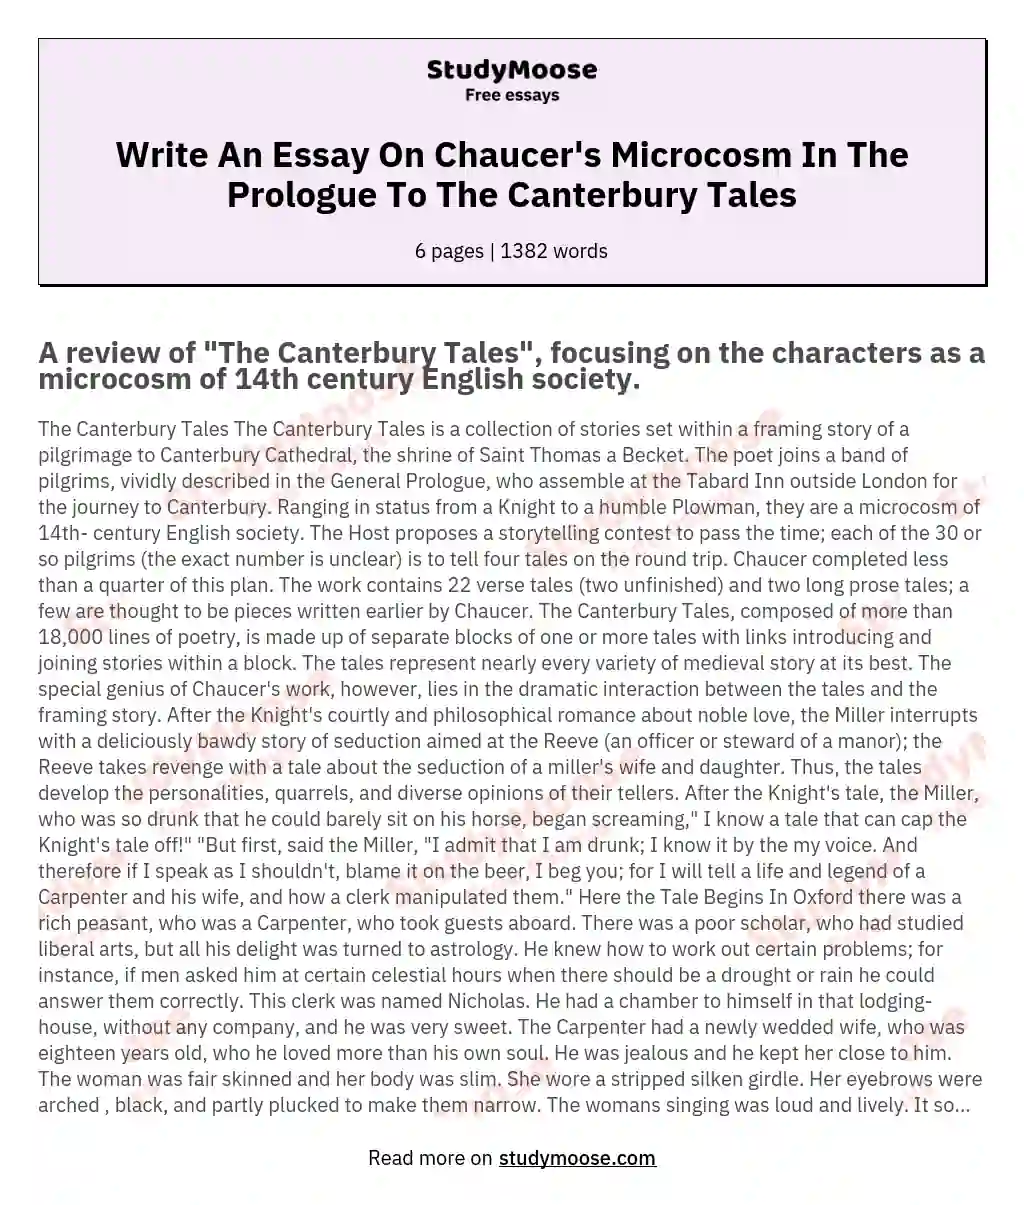 Write An Essay On Chaucer's Microcosm In The Prologue To The Canterbury Tales